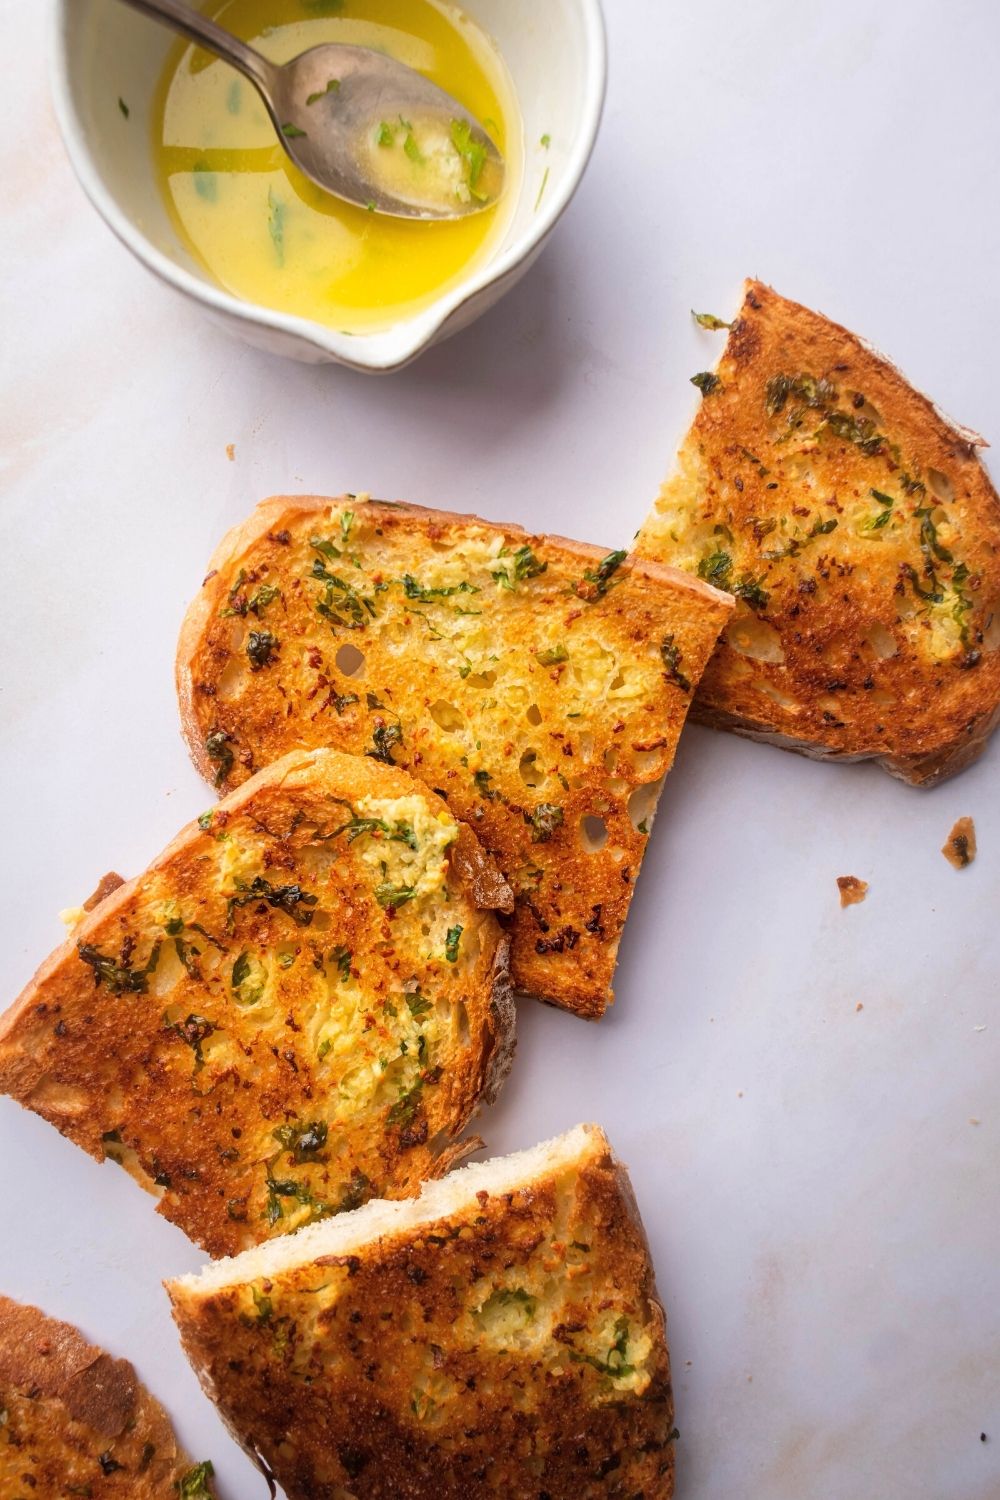 Four pieces of garlic bread touching the sides of one another on a white counter. Behind it is half of a white cup filled with garlic butter.